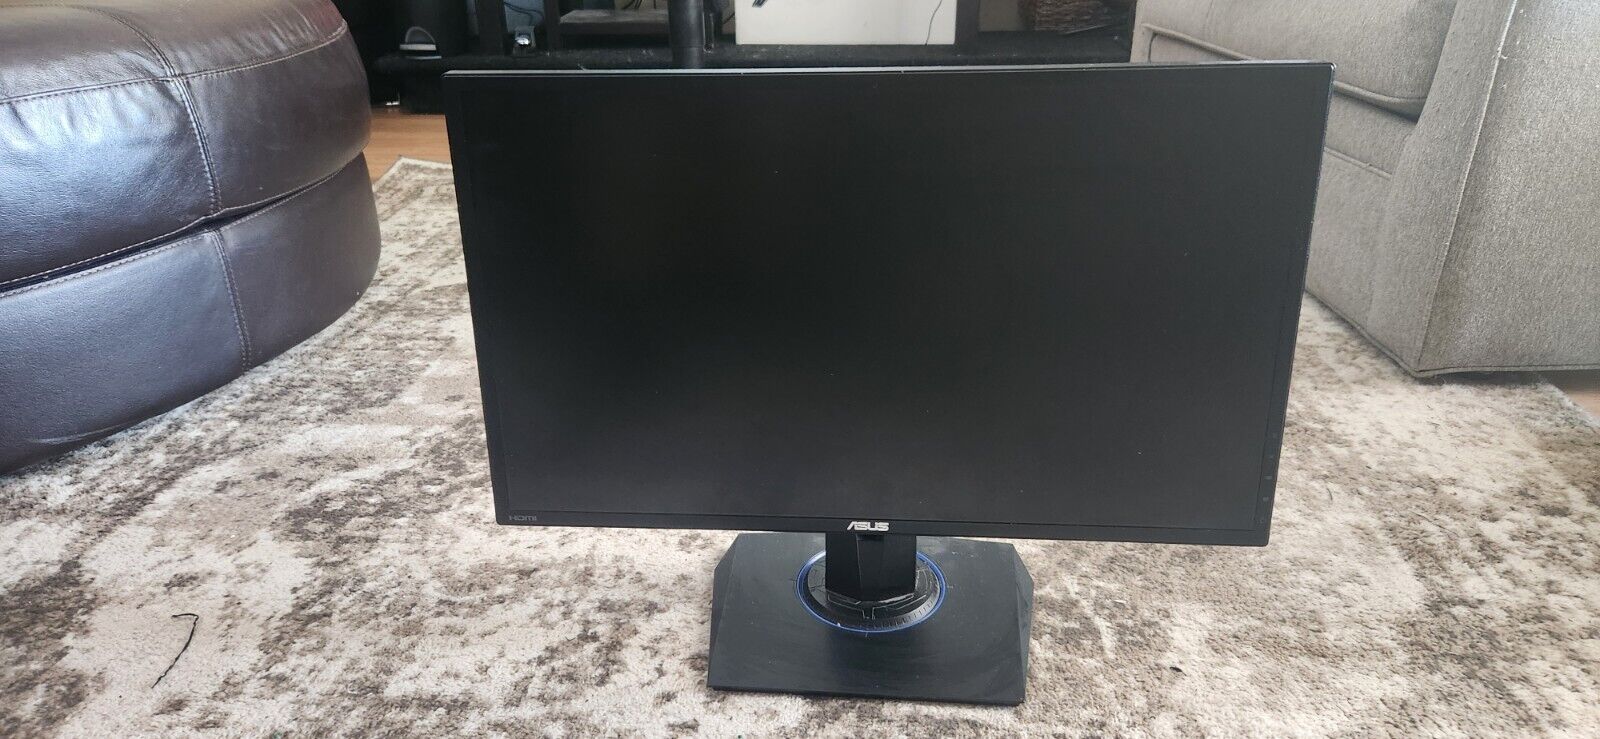 ASUS MONITOR *GREAT CONDITION*